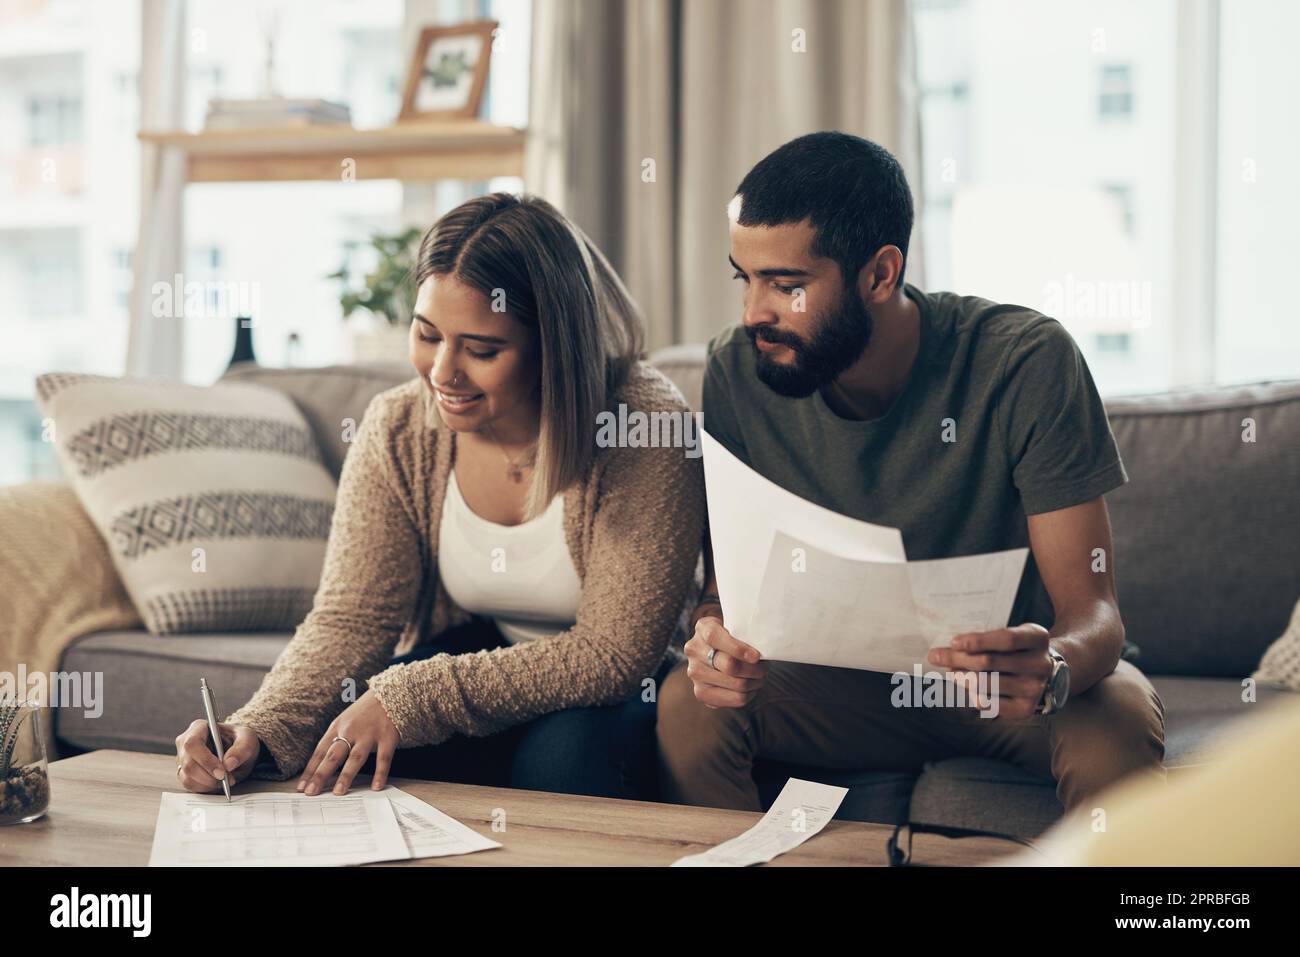 Taking the right steps to stay on financial track. a young couple going over paperwork at home. Stock Photo